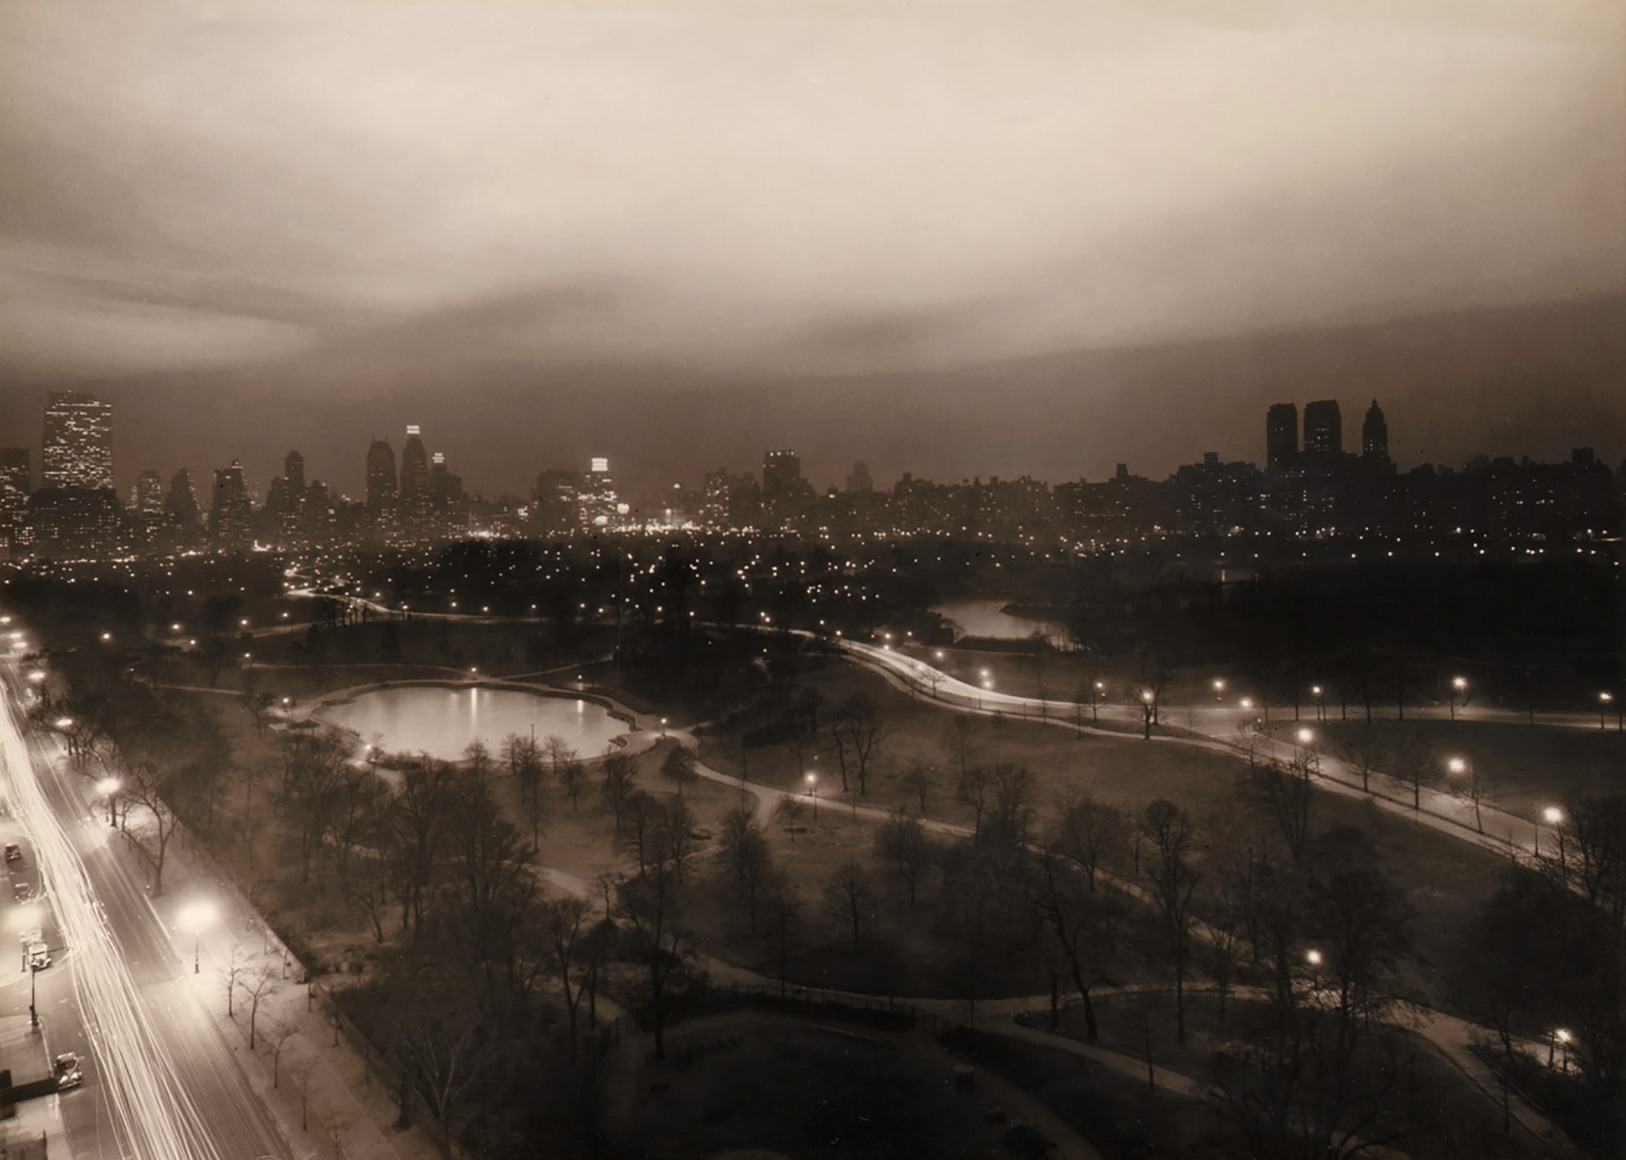 Paul J. Woolf, Central Park Looking South, ​c. 1936. Night time cityscape with the park filling the lower half of the frame, a street running up the lower left. Tall buildings across the center of the frame and an overcast sky above.